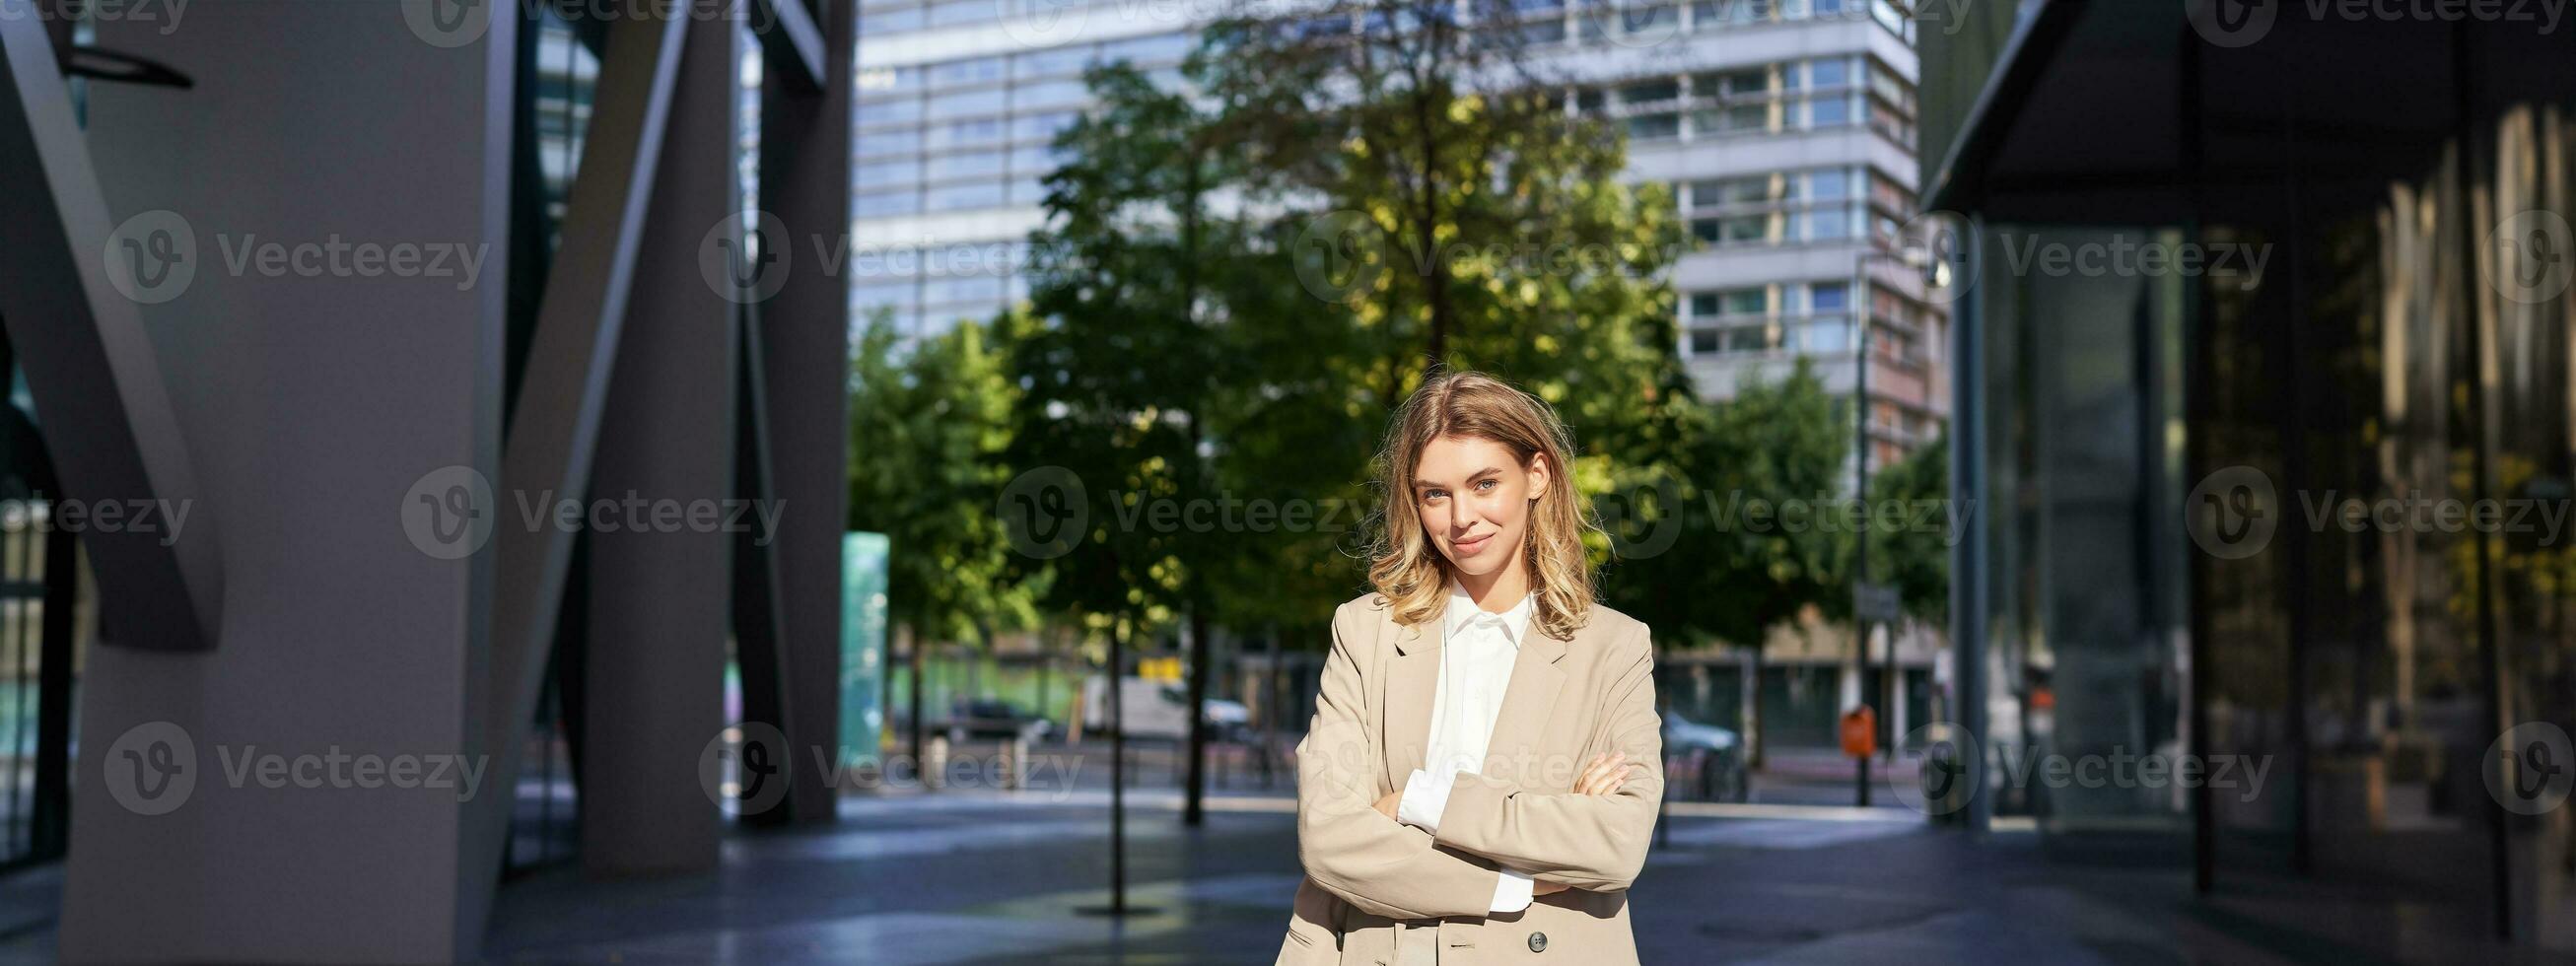 Portrait of smiling businesswoman in corporate clothing, looking confident and happy, wearing beige suit, standing outdoors on street, outside office photo